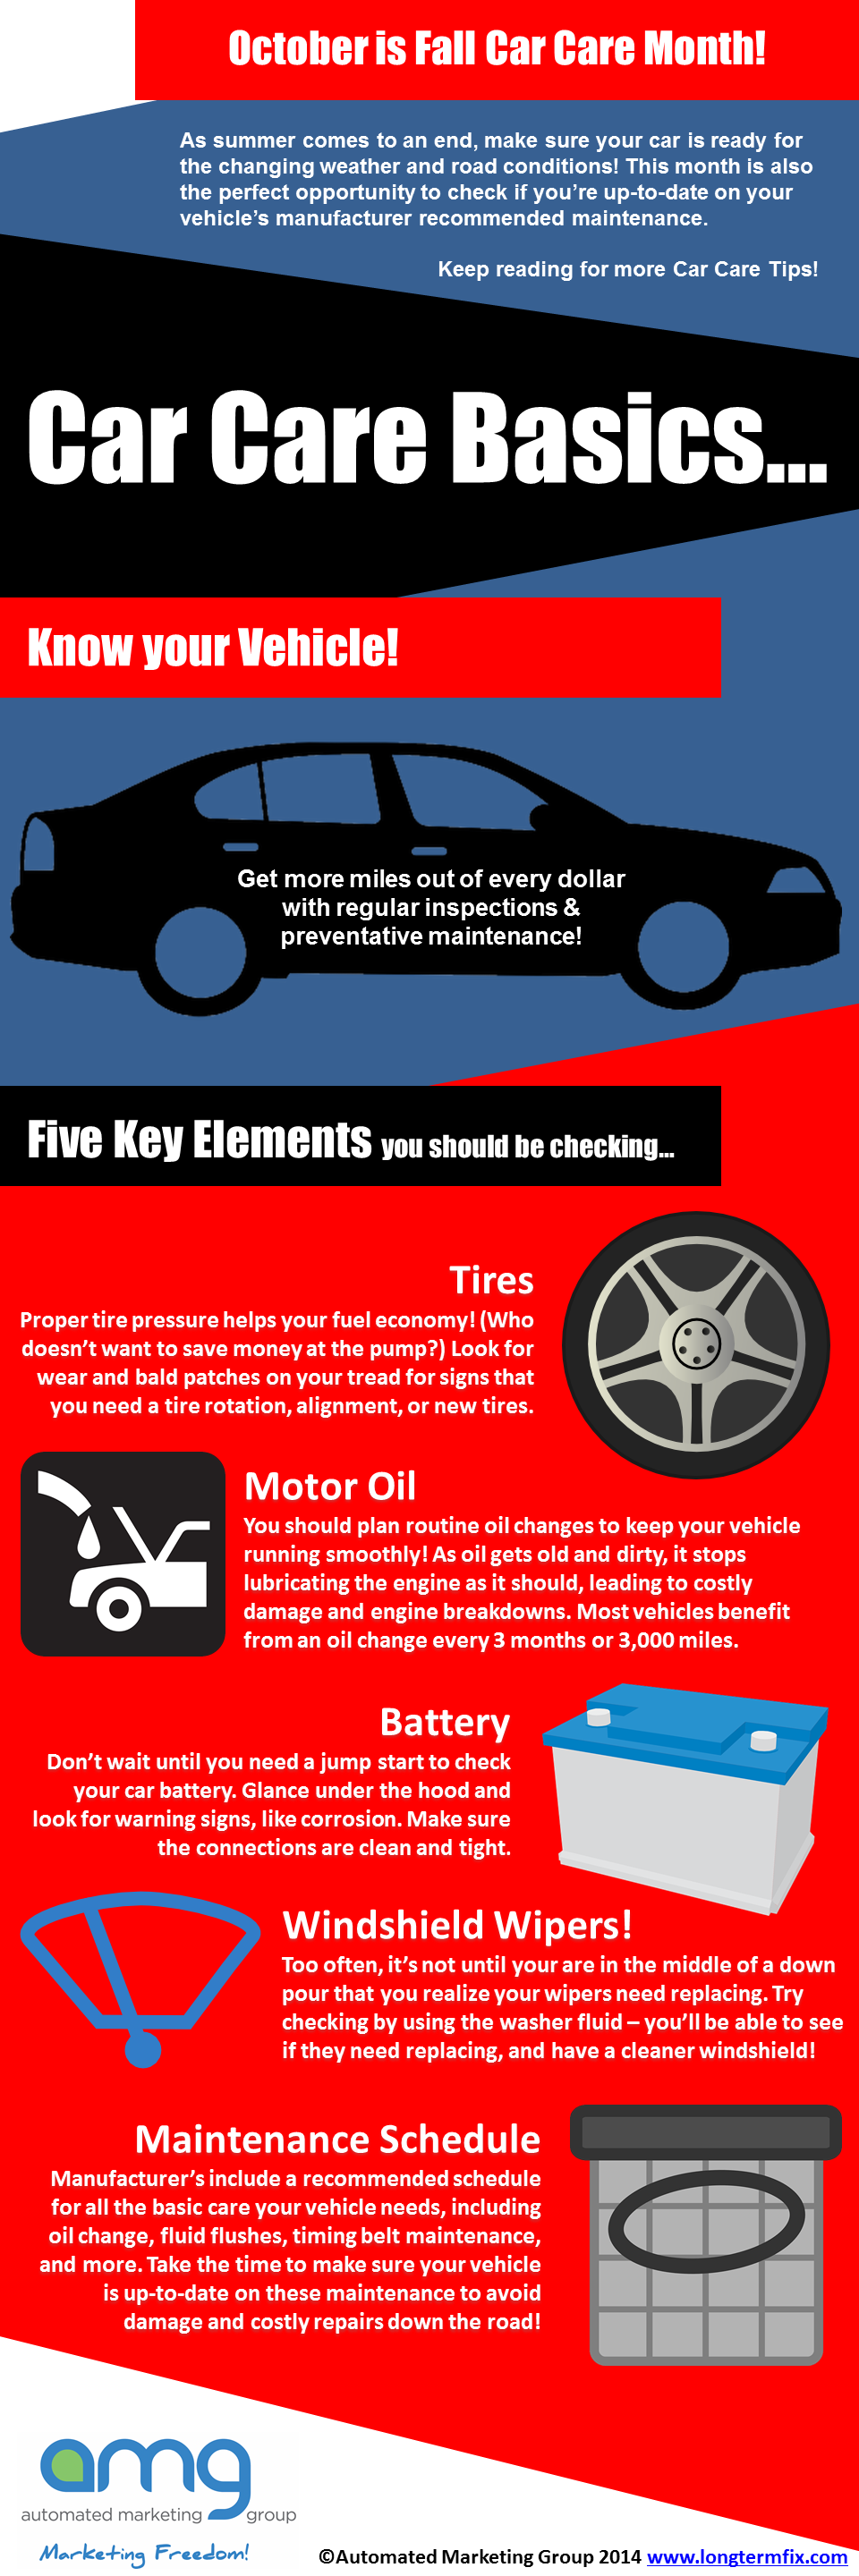 Motorist Checklist for Fall Car Care Month in October - Be Car